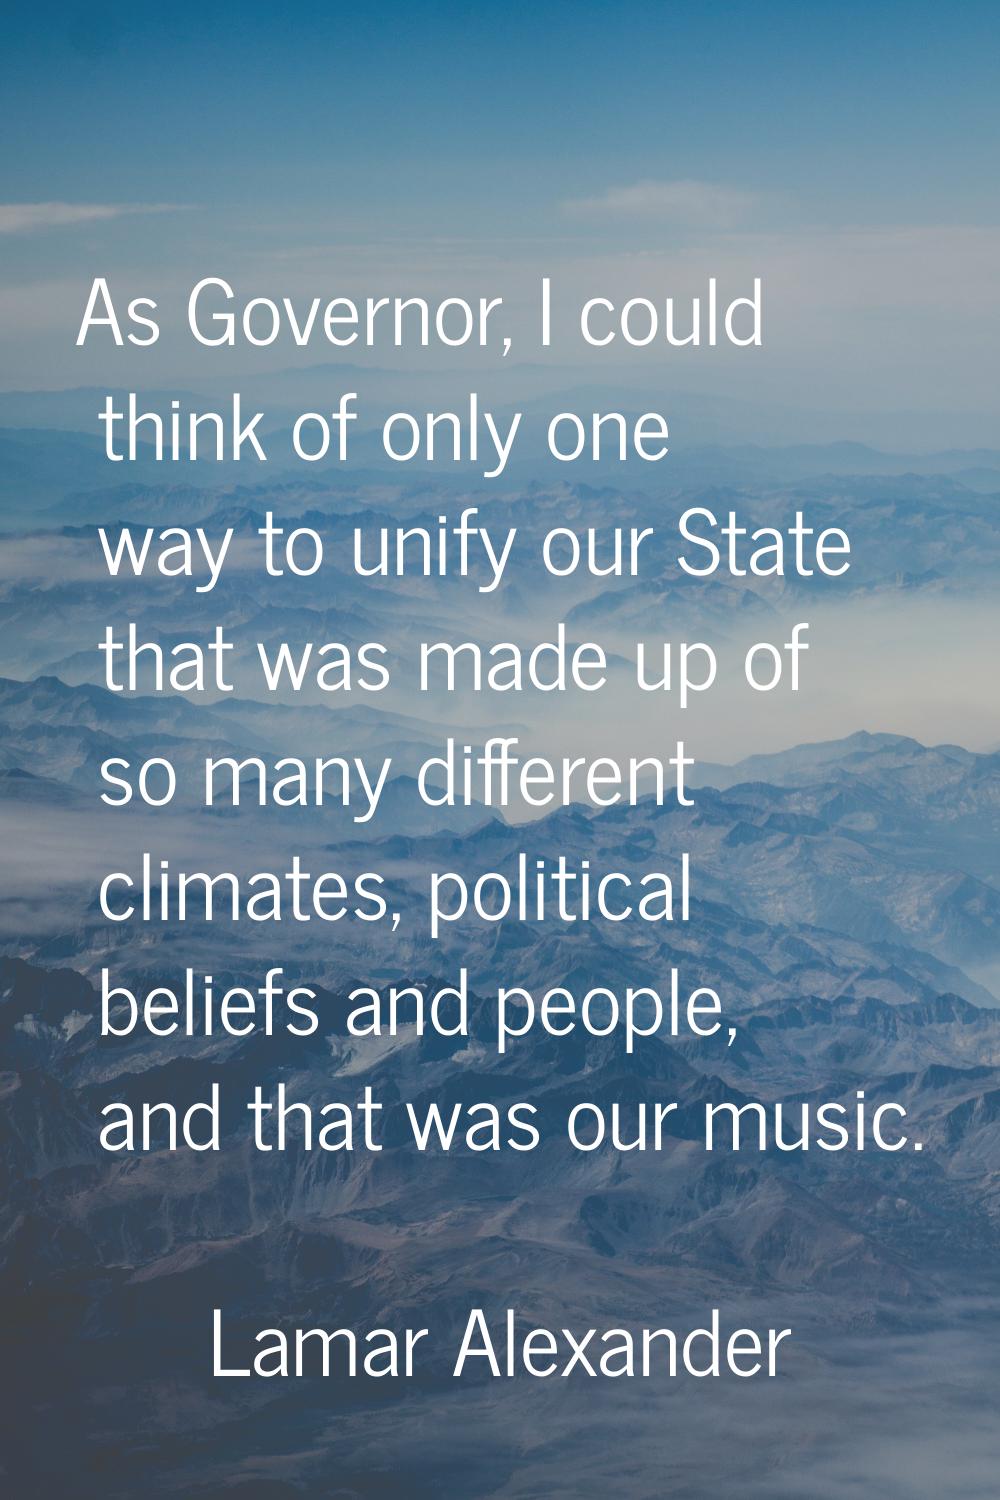 As Governor, I could think of only one way to unify our State that was made up of so many different